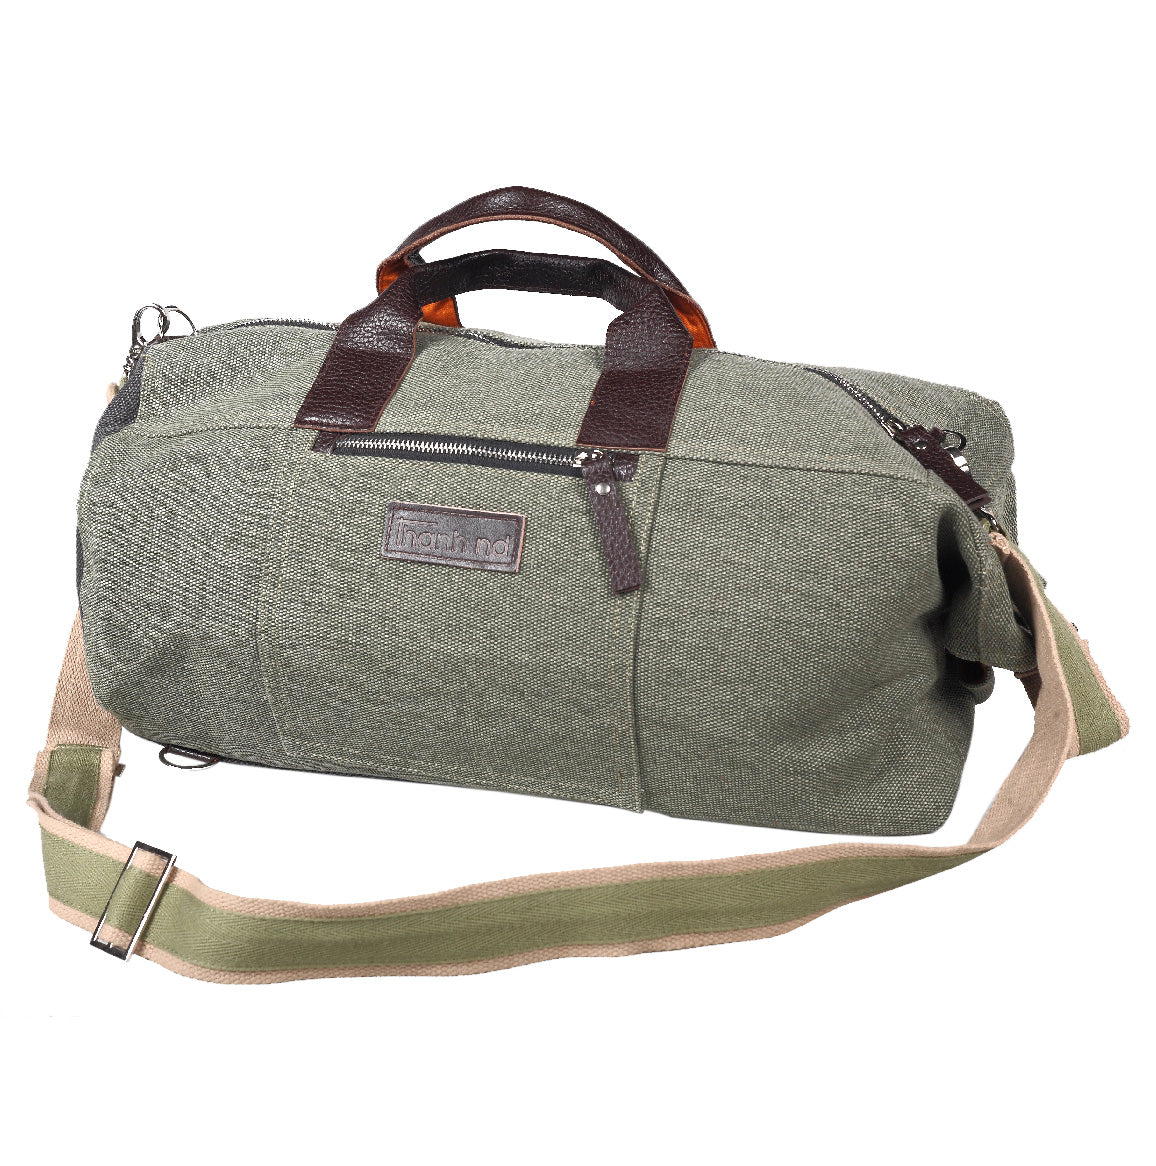 "TND" Duffle Bag - small